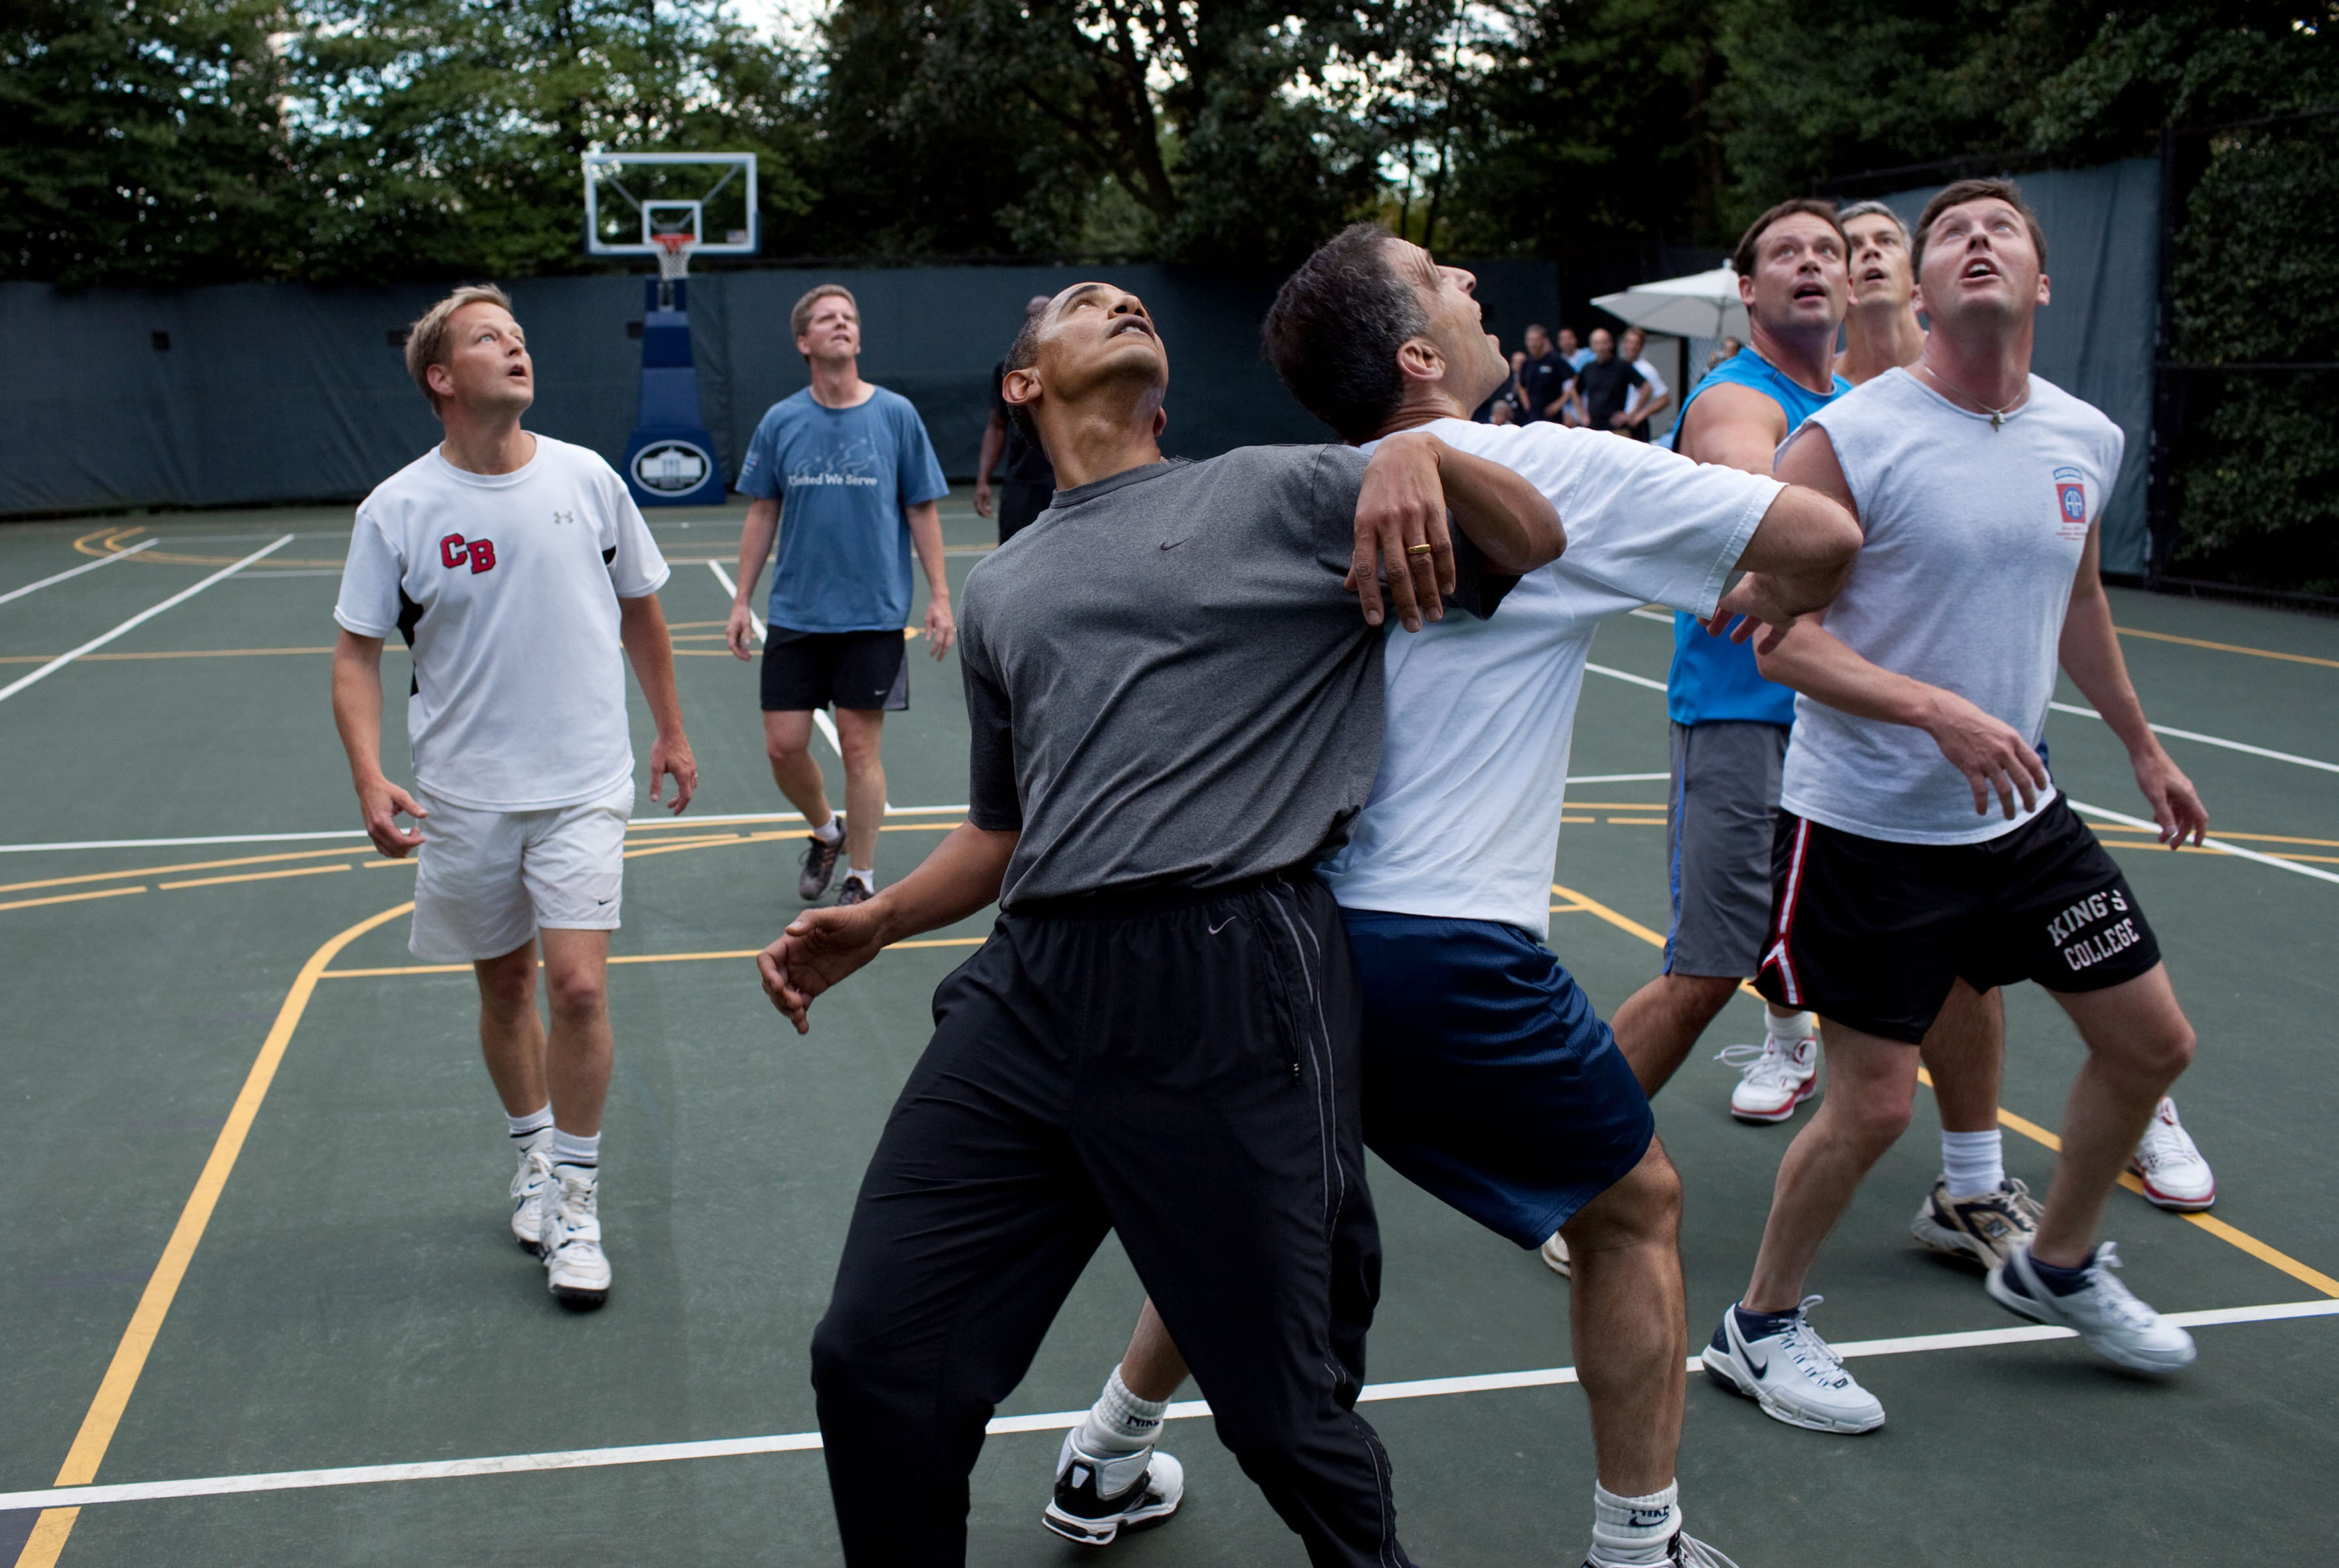 Barack_Obama_playing_basketball_with_members_of_Congress_and_Cabinet_secretaries.jpg